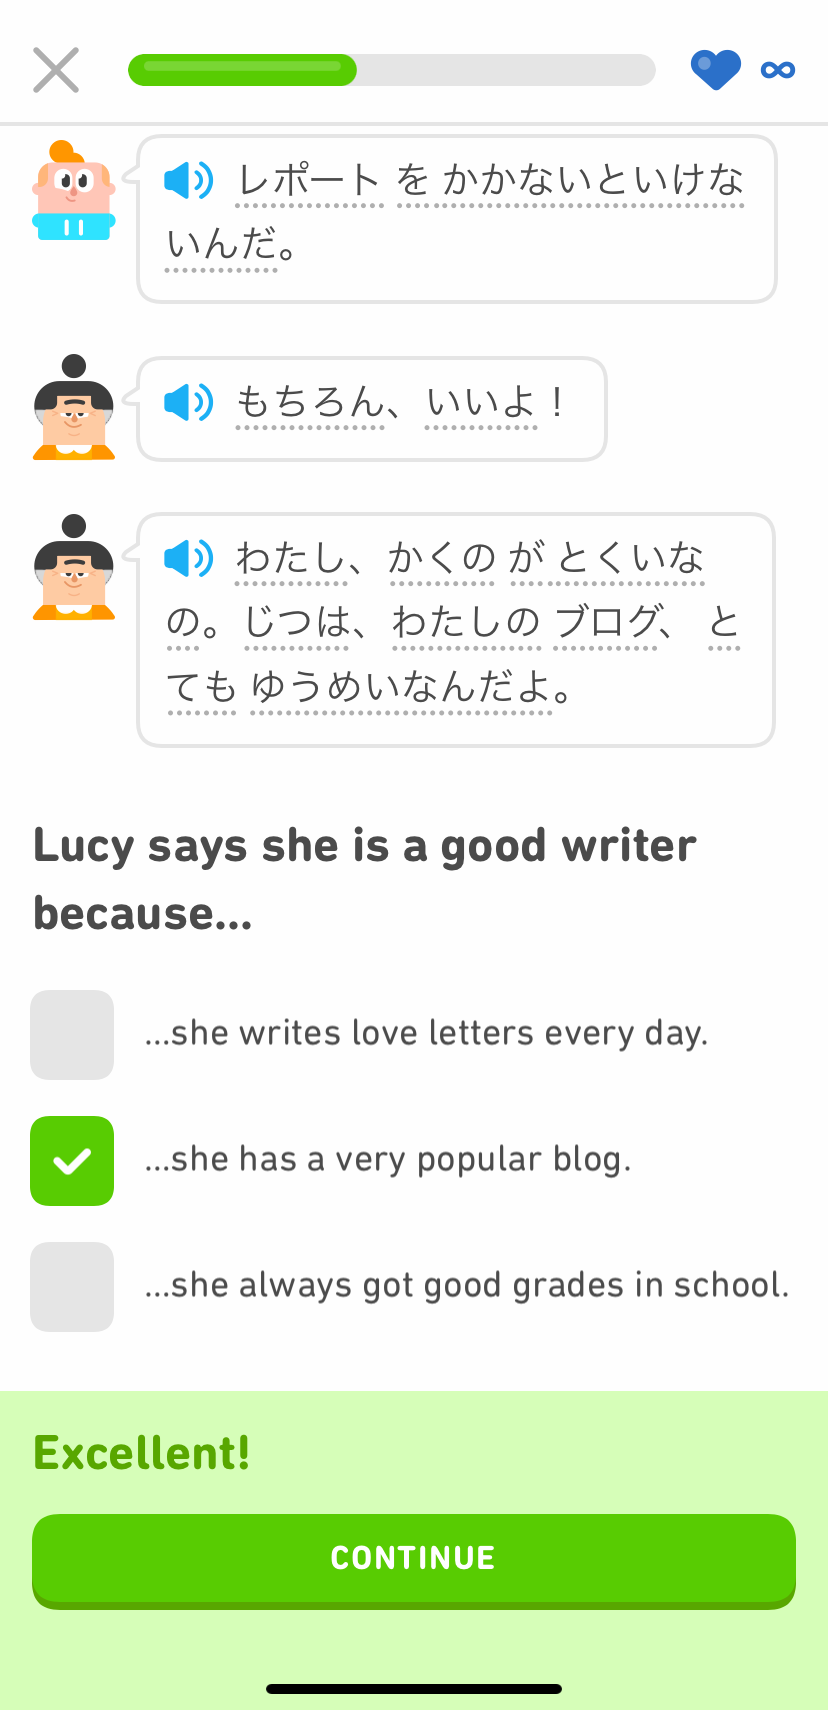 Screenshot of a Japanese Story showing a dialogue between Junior and Lucy. Below their lines is the prompt "Lucy says she is a good writer because..." followed by three answer choices: "she writes love letters every day," "she has a very popular blog," and "she always got good grades in school."